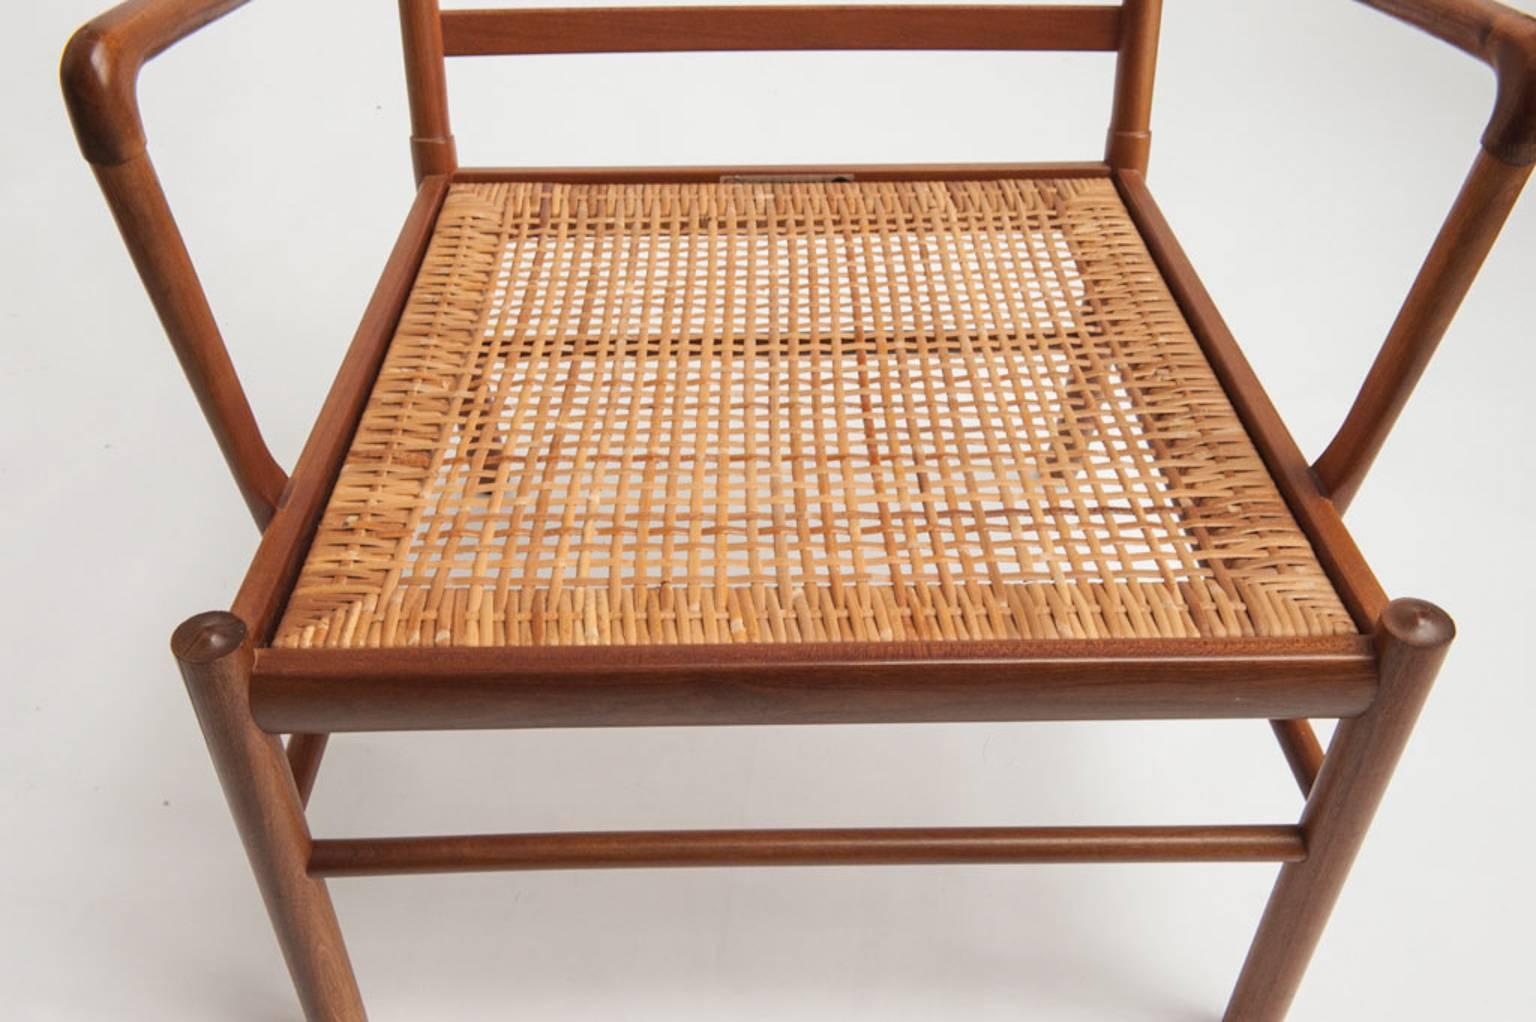 Danish Colonial Chair by Ole Wanscher